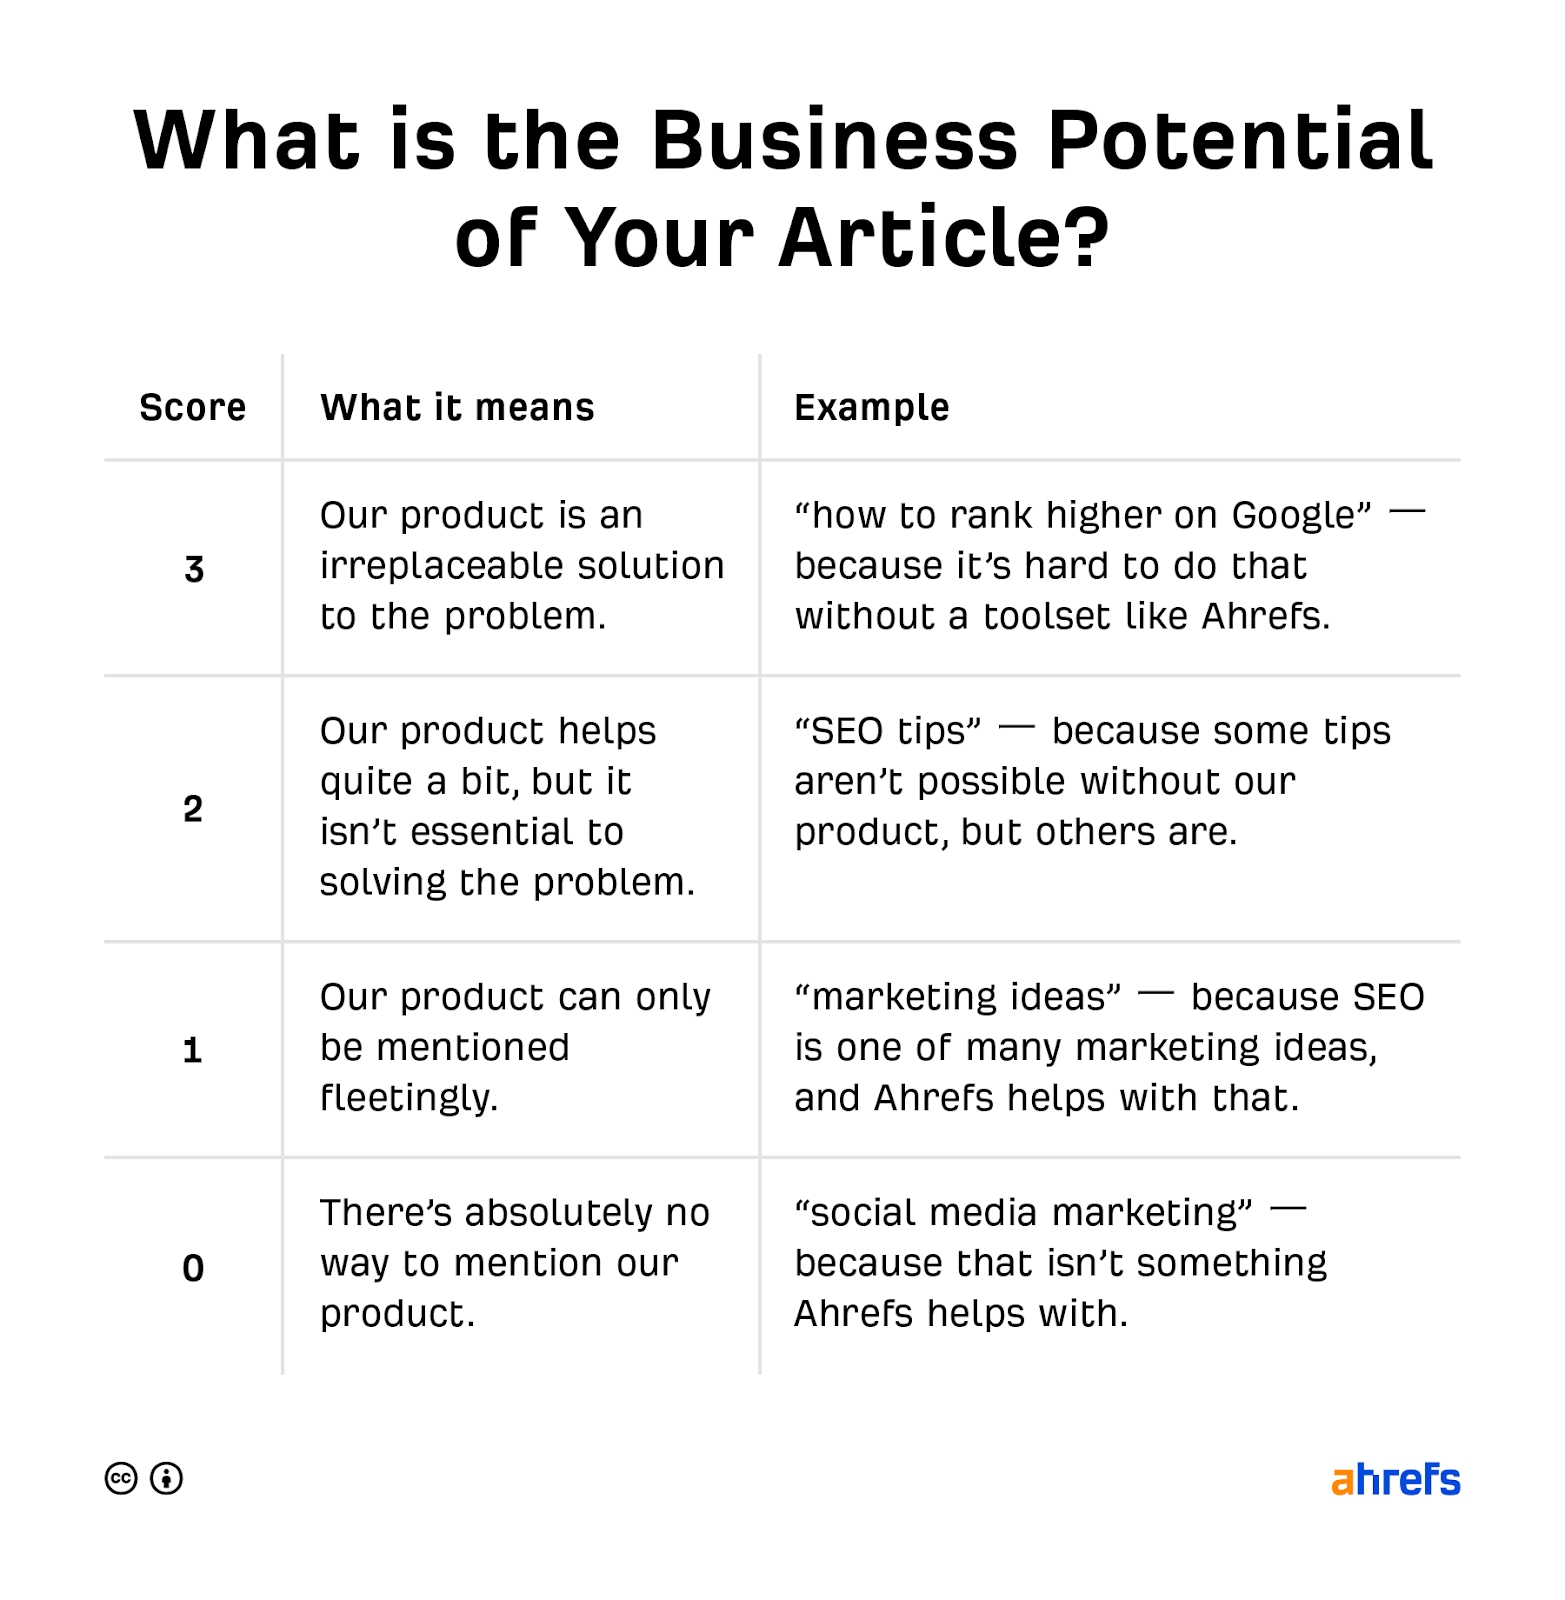 The Business Potential scale we use at Ahrefs.